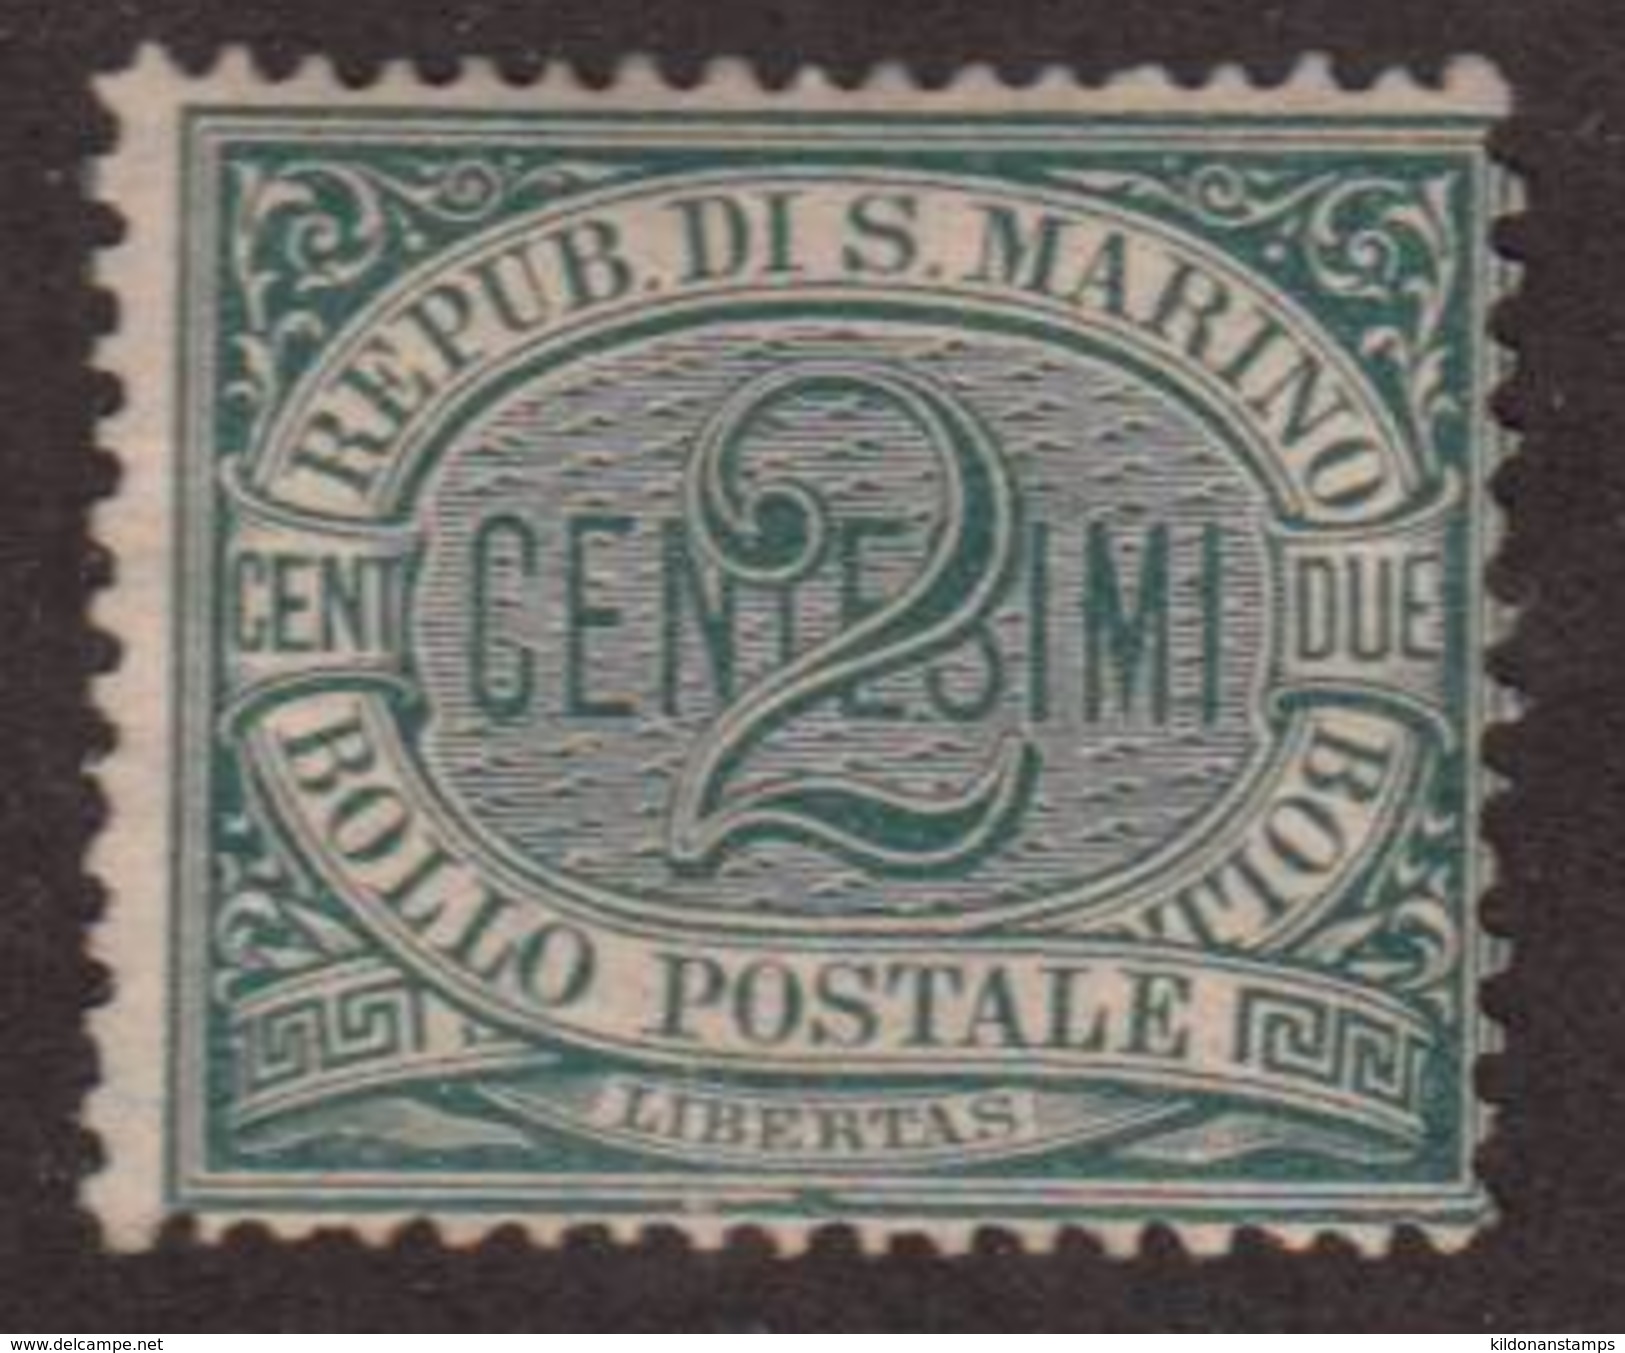 San Marino 1877 First Issued Stamp, Mint Mounted, See Note, Sc# 1 - Ungebraucht